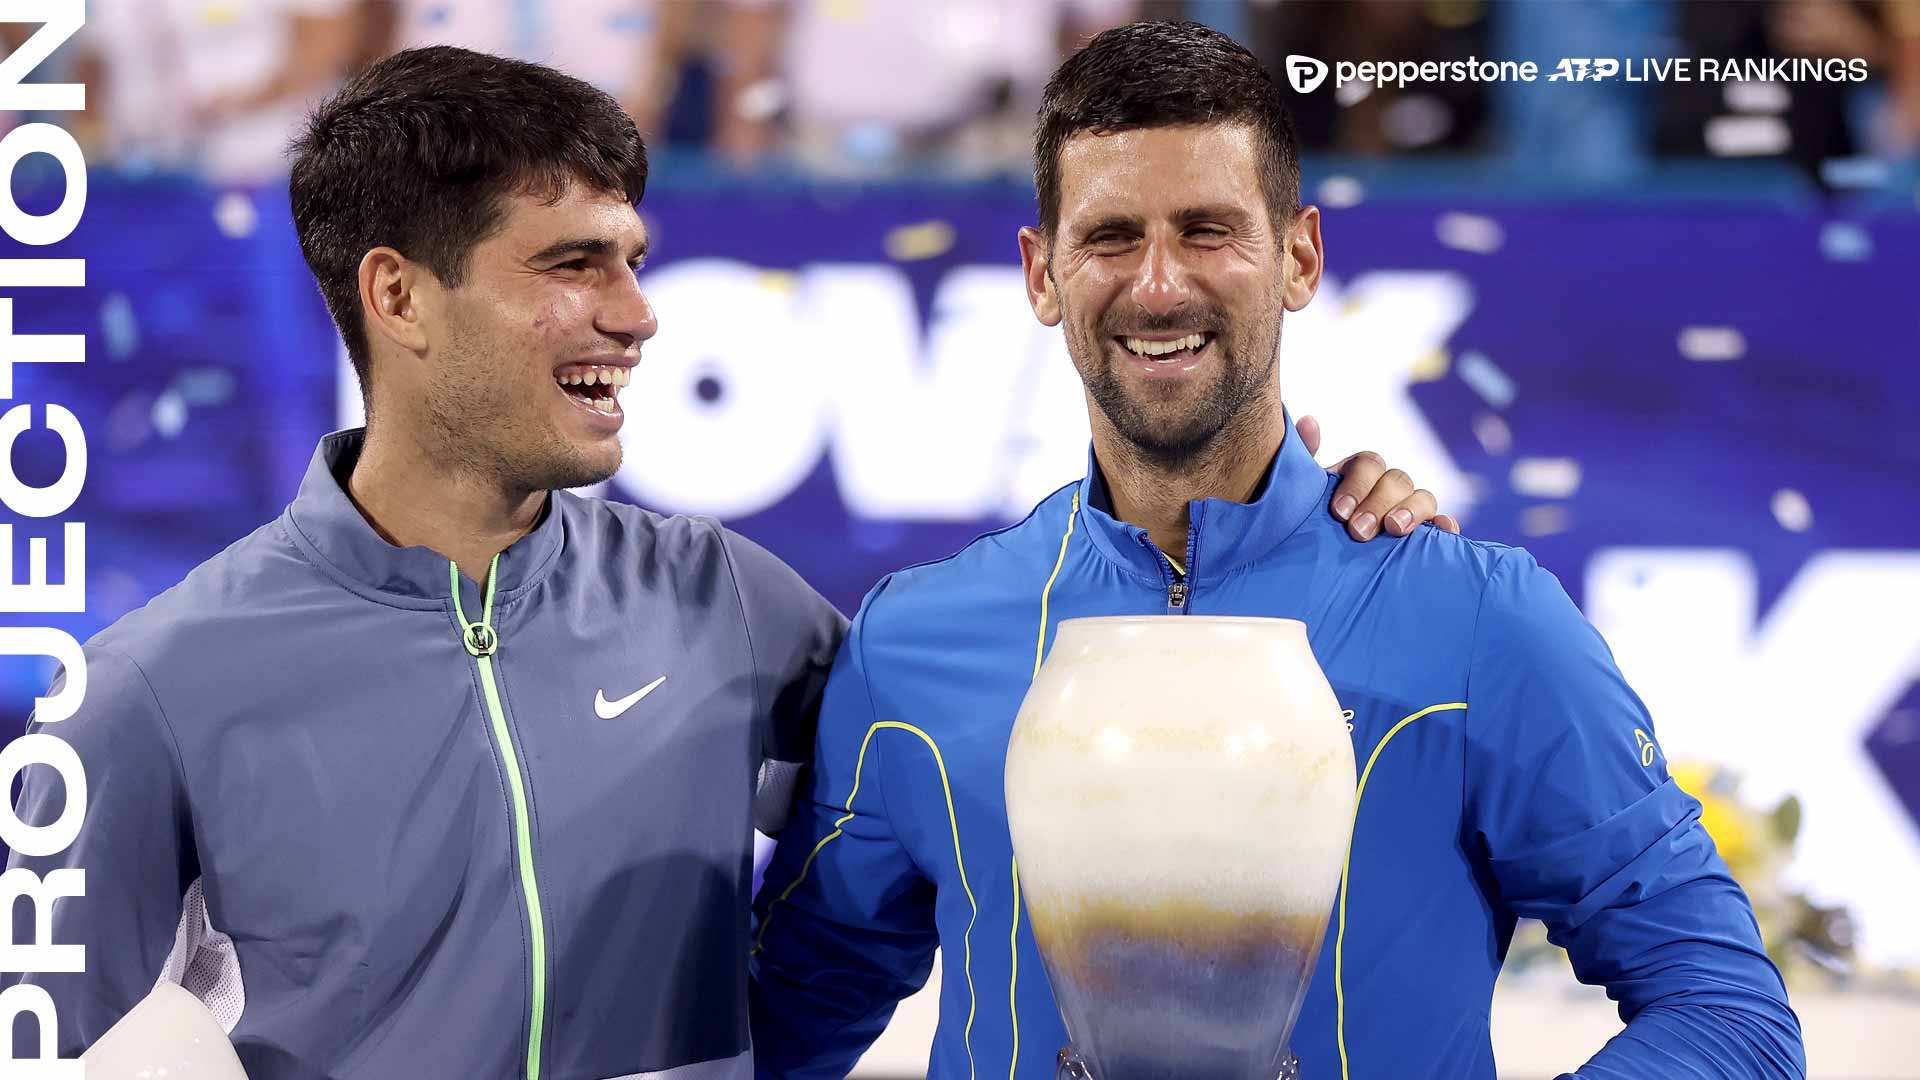 ATP battle for No 1 ranking: What Novak Djokovic needs to do at US